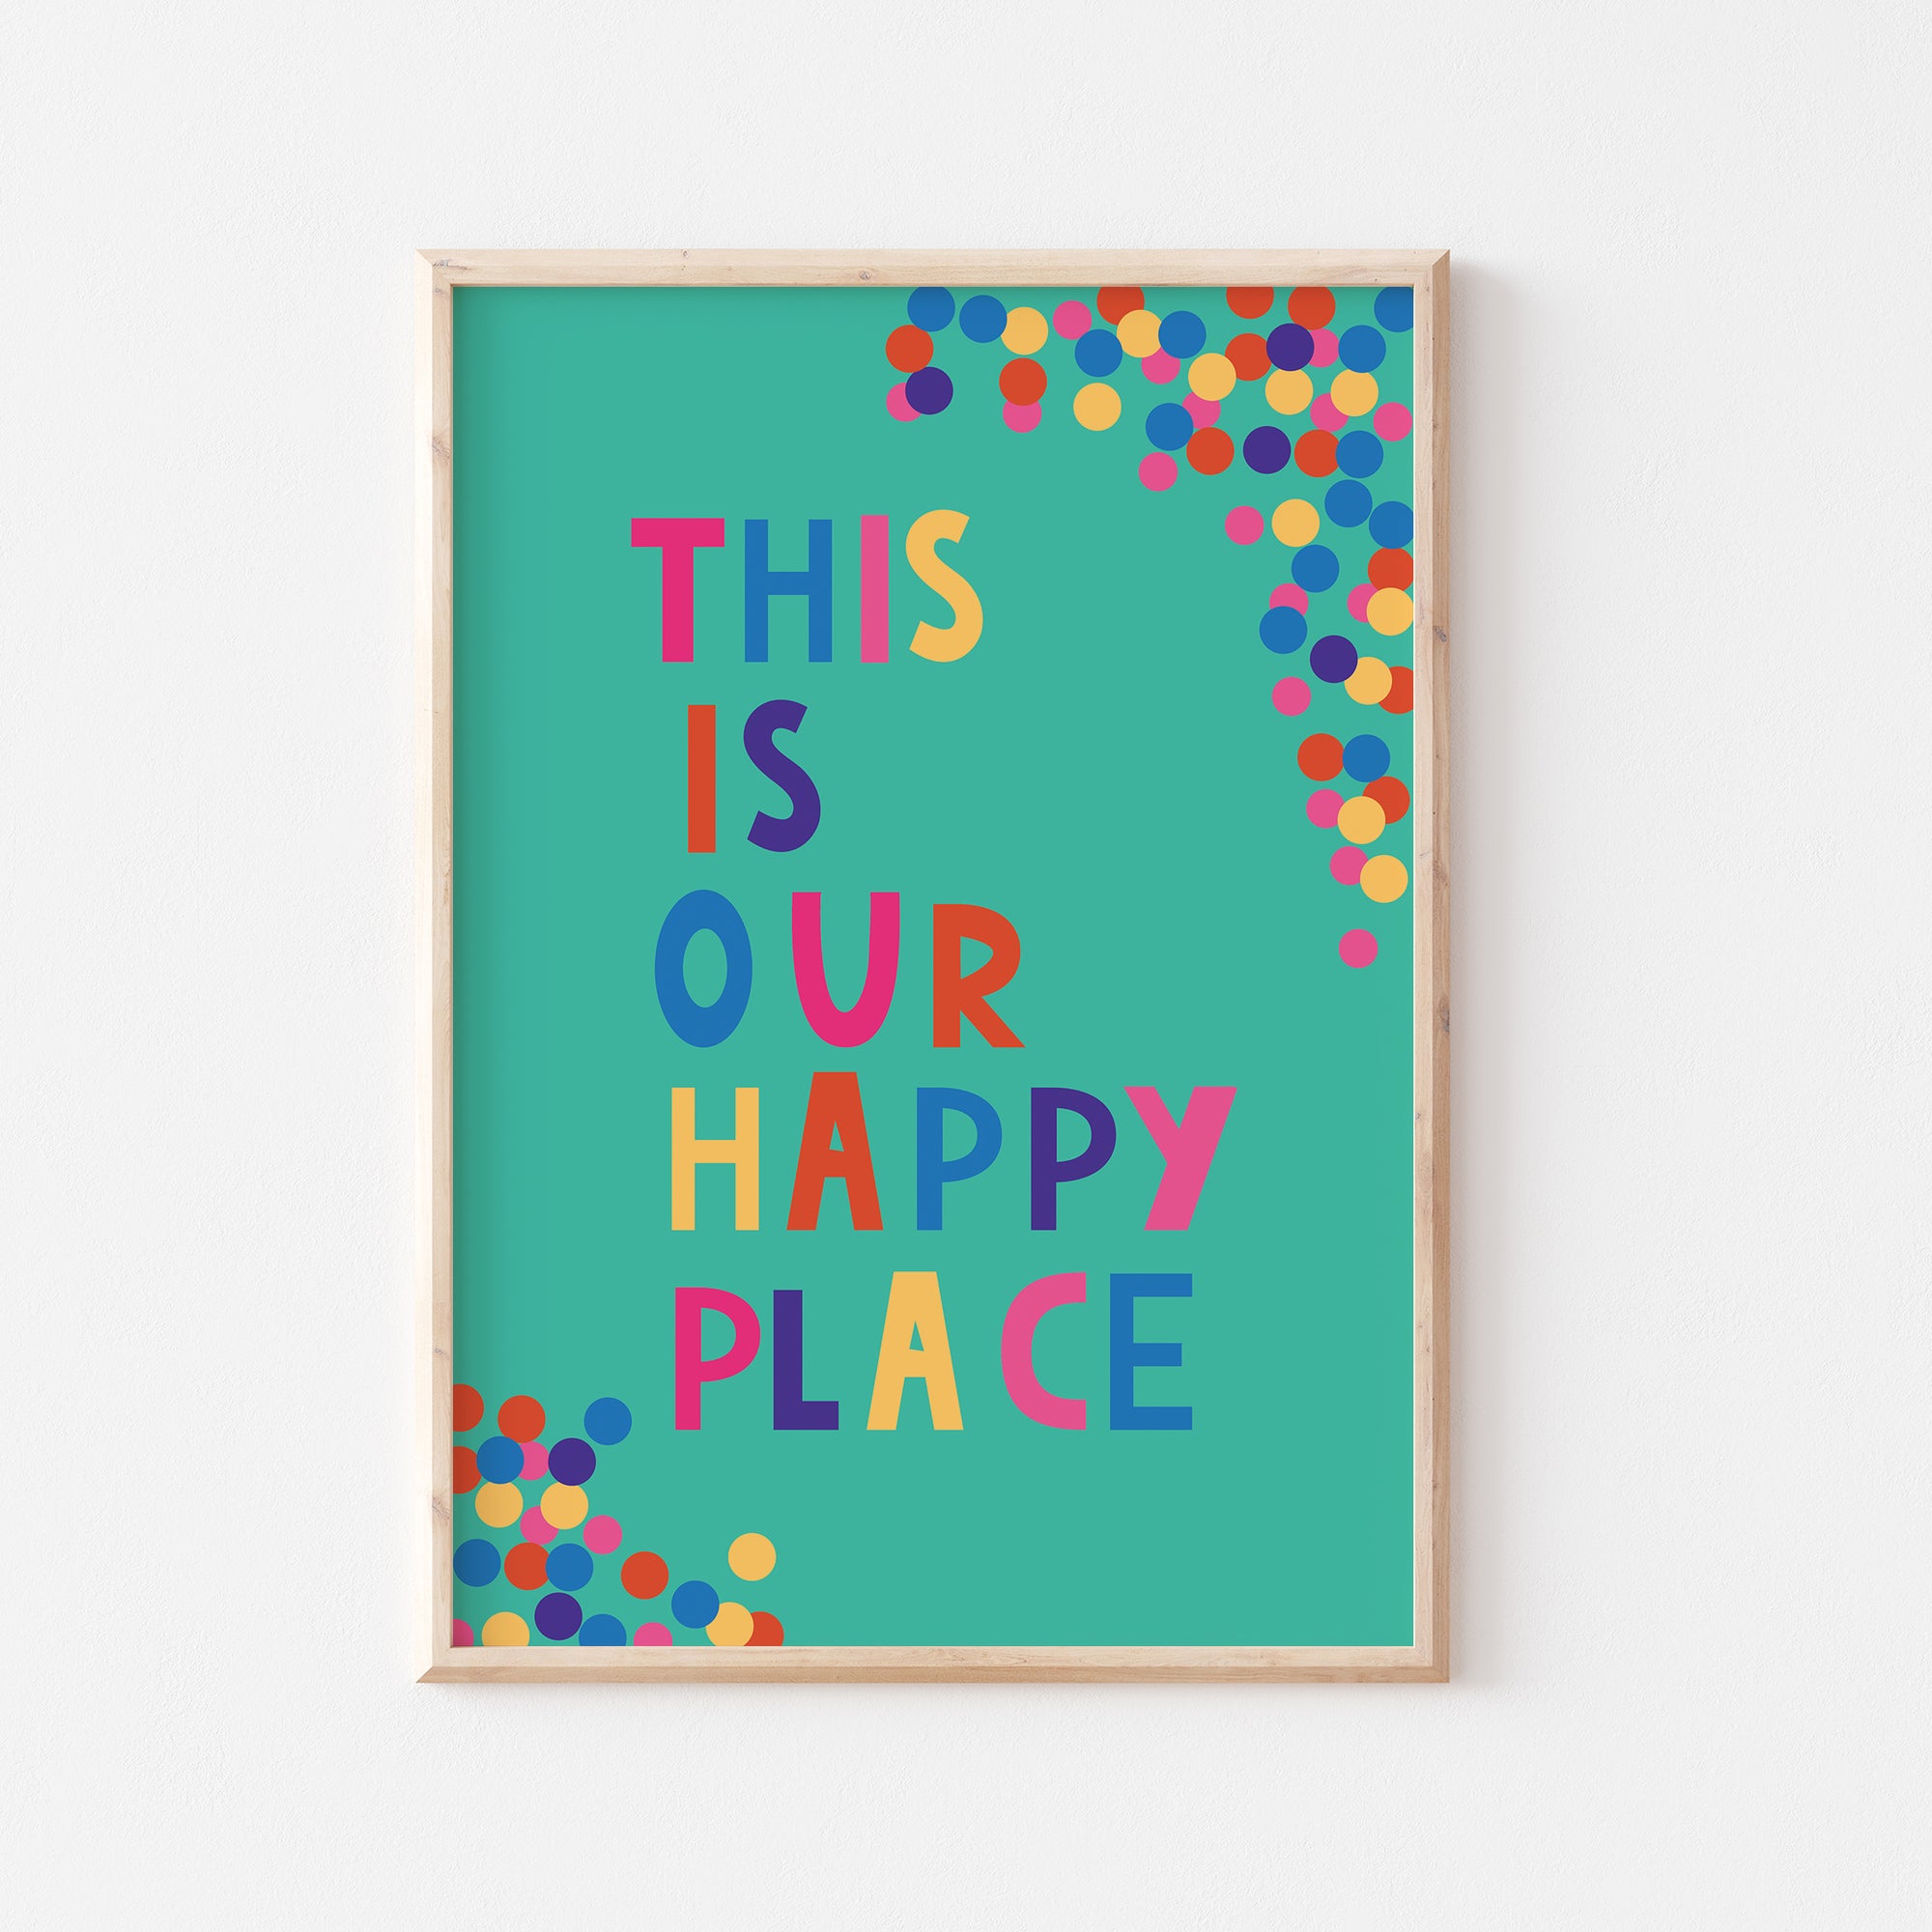 This is our happy place Print